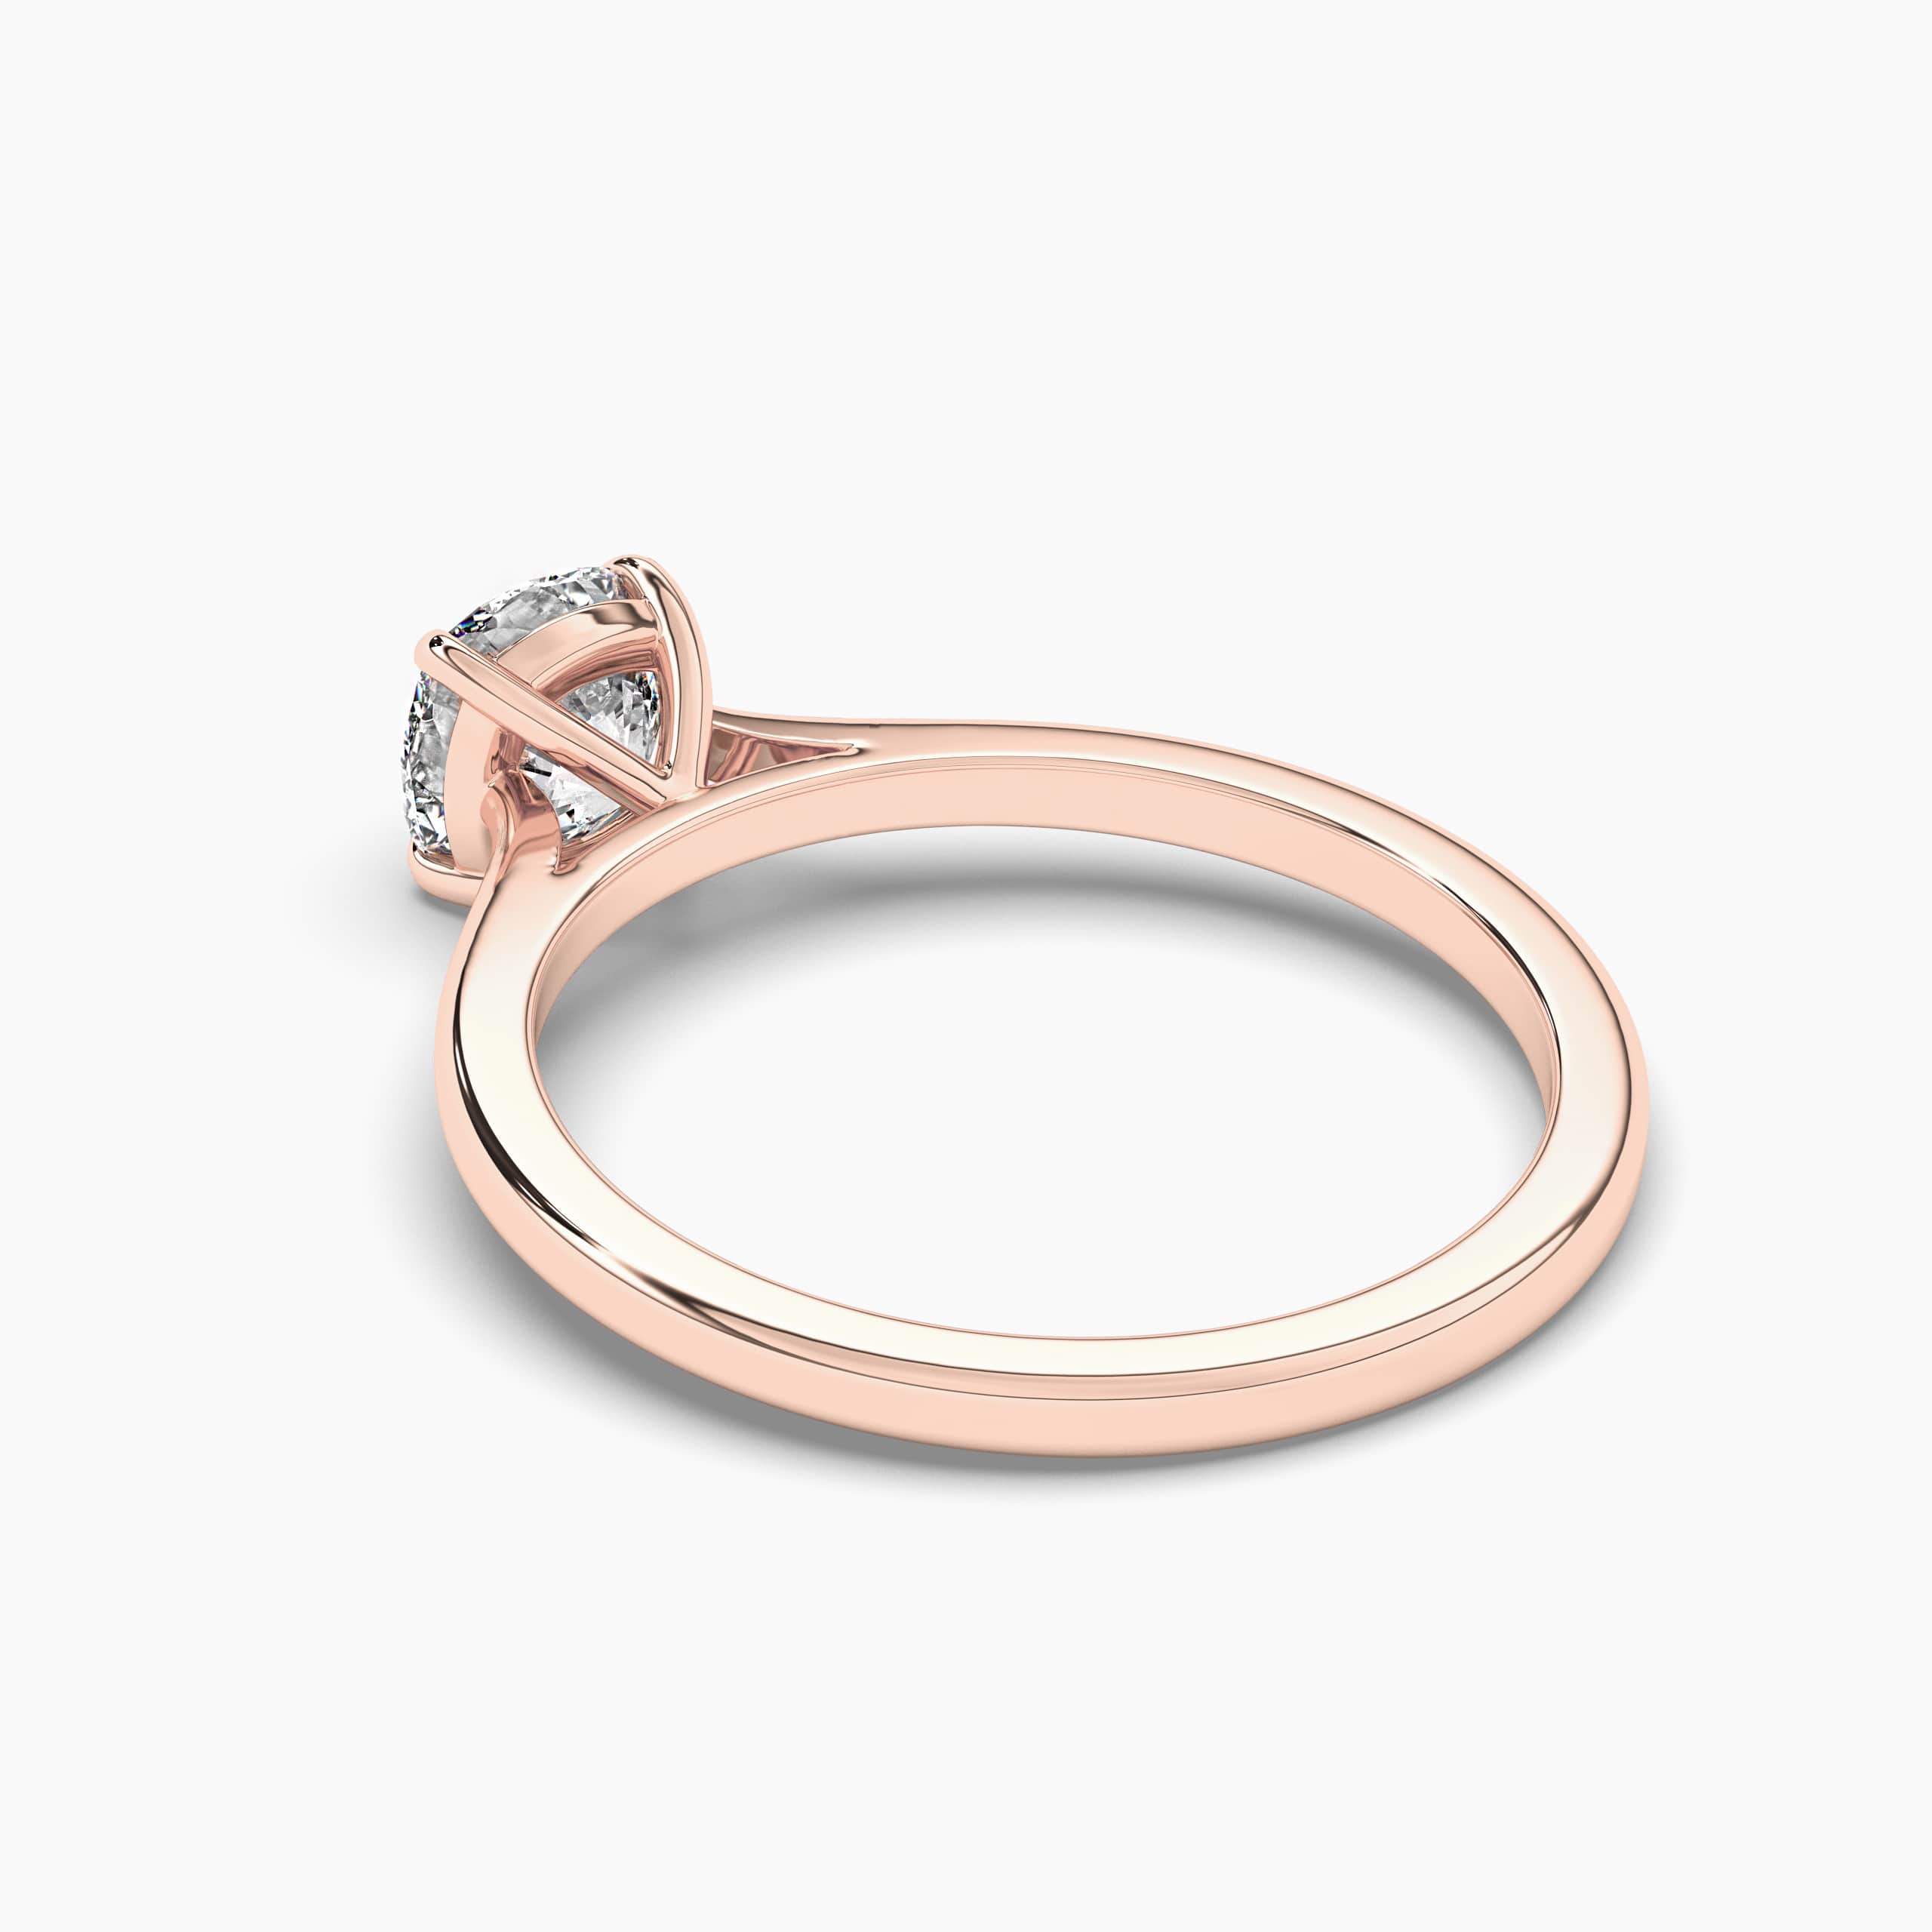 Rose Gold Cushion Cut Diamond Solitaire Engagement Ring 